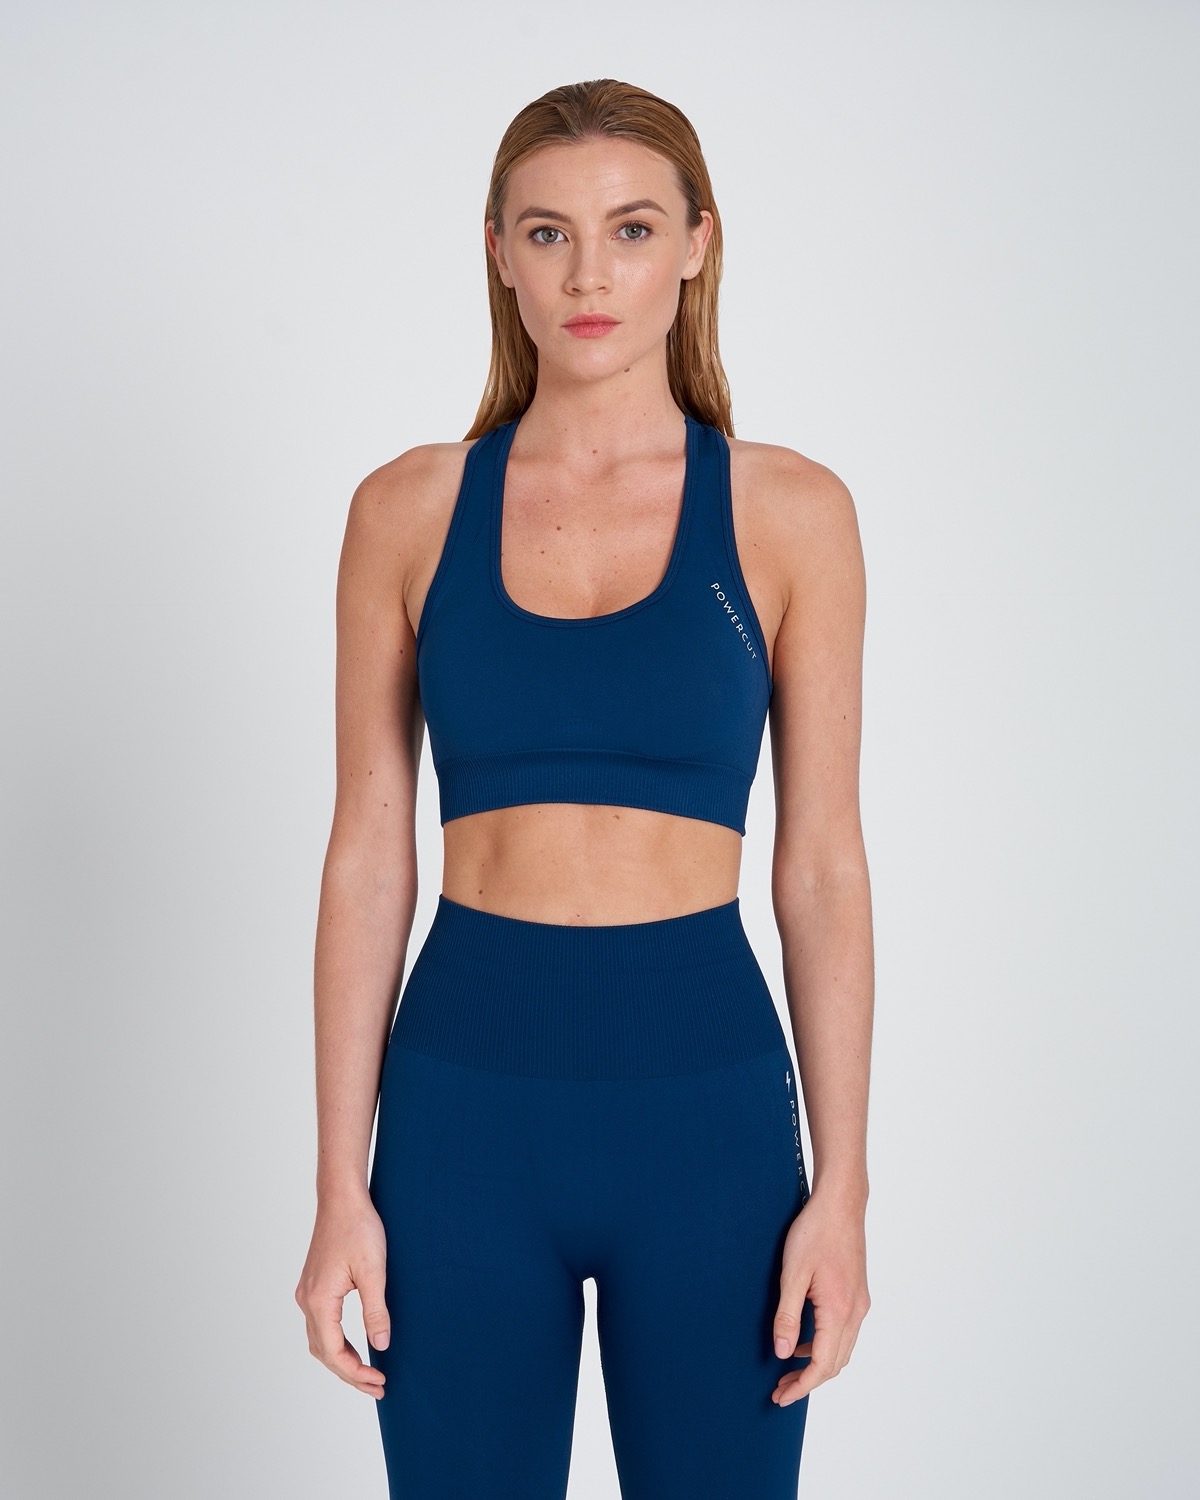 https://dunnes.btxmedia.com/pws/client/images/catalogue/products/1550117/zoom/1550117_navy.jpg